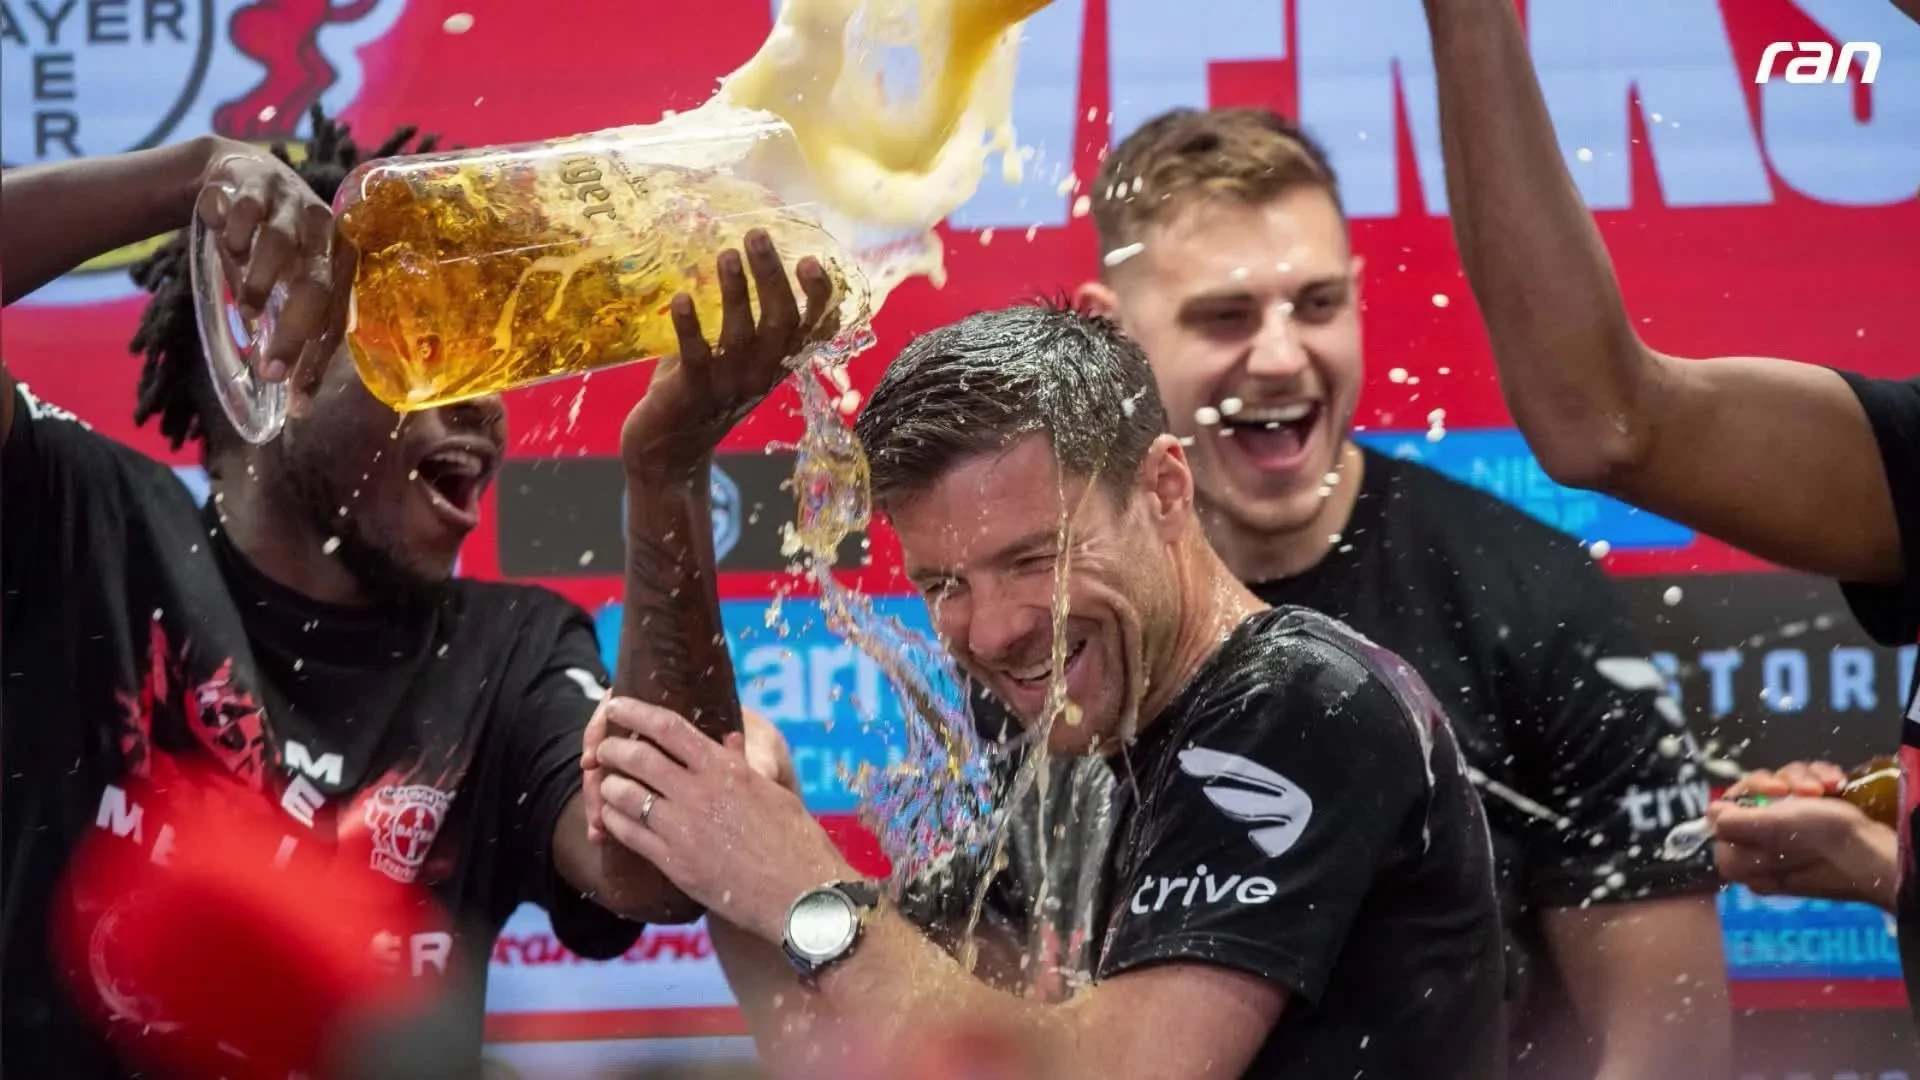 Bayer is champion: All beer showers for the new title holder